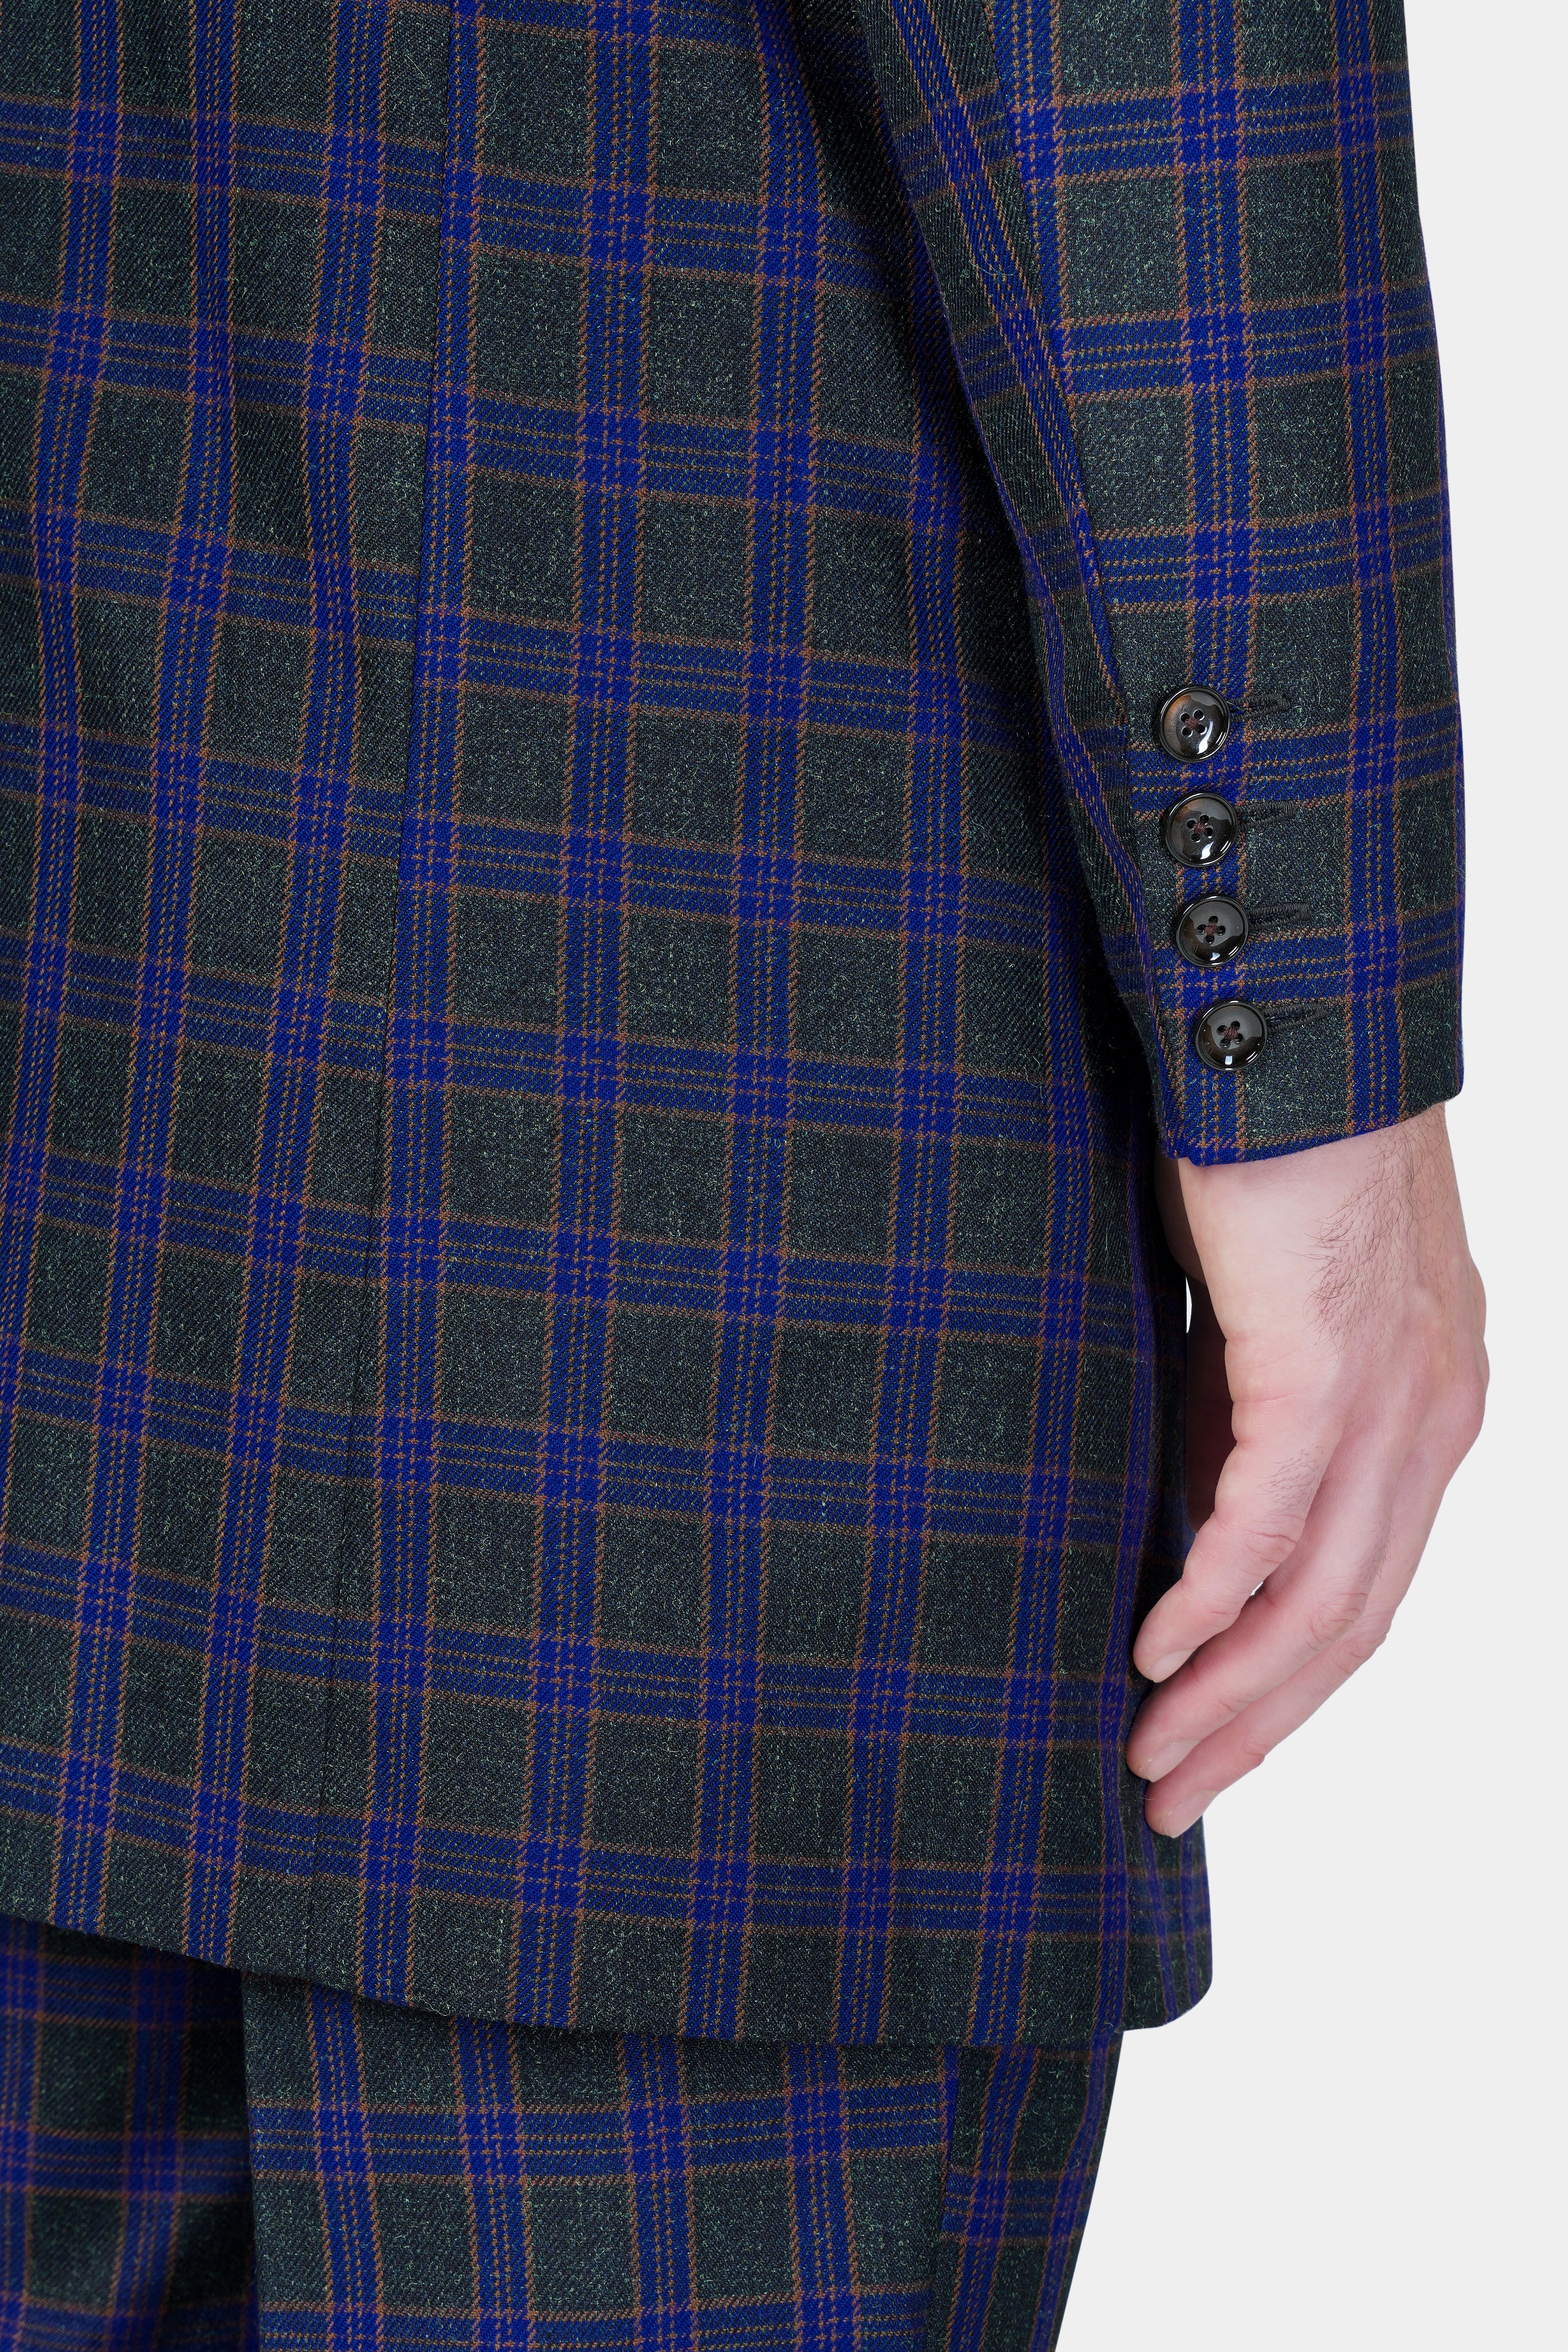 Zodiac Blue and Piano Black Plaid Tweed Double Breasted Trench Coat